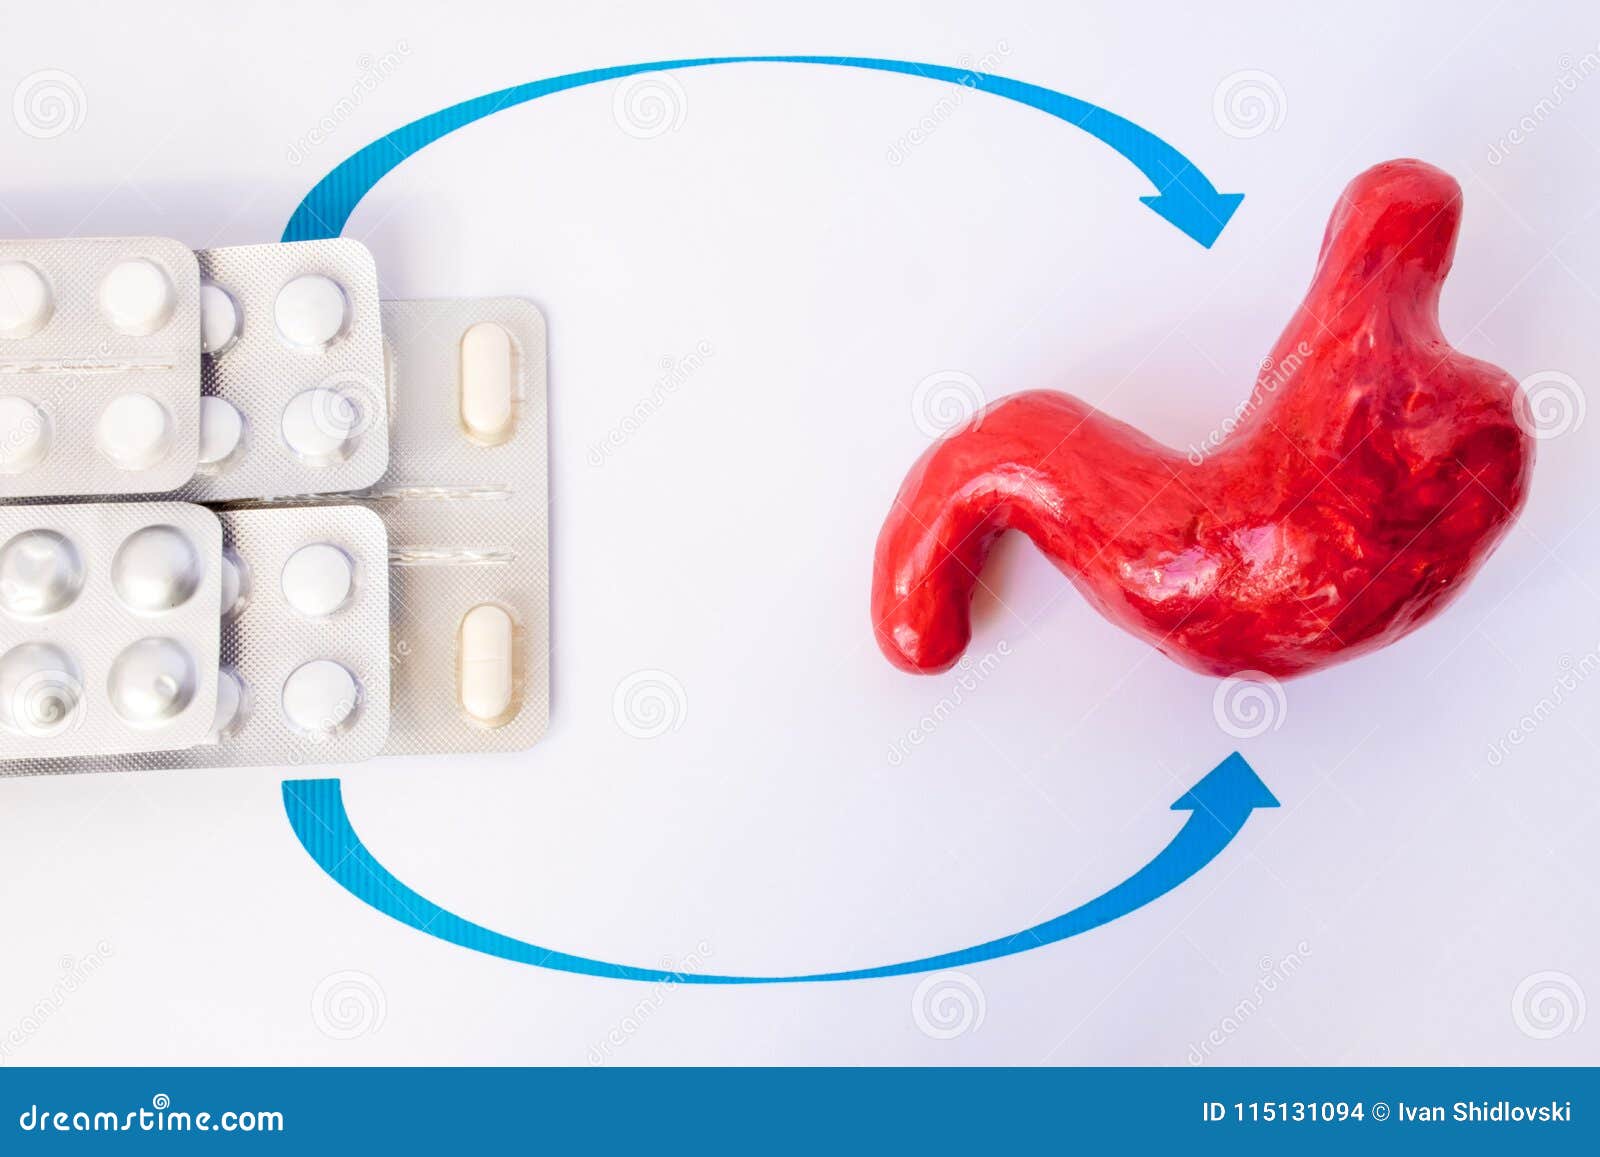 medication in pills in blister indicate stomach model. concept photo treatment of gastric diseases, peptic ulcers, gastritis, heli